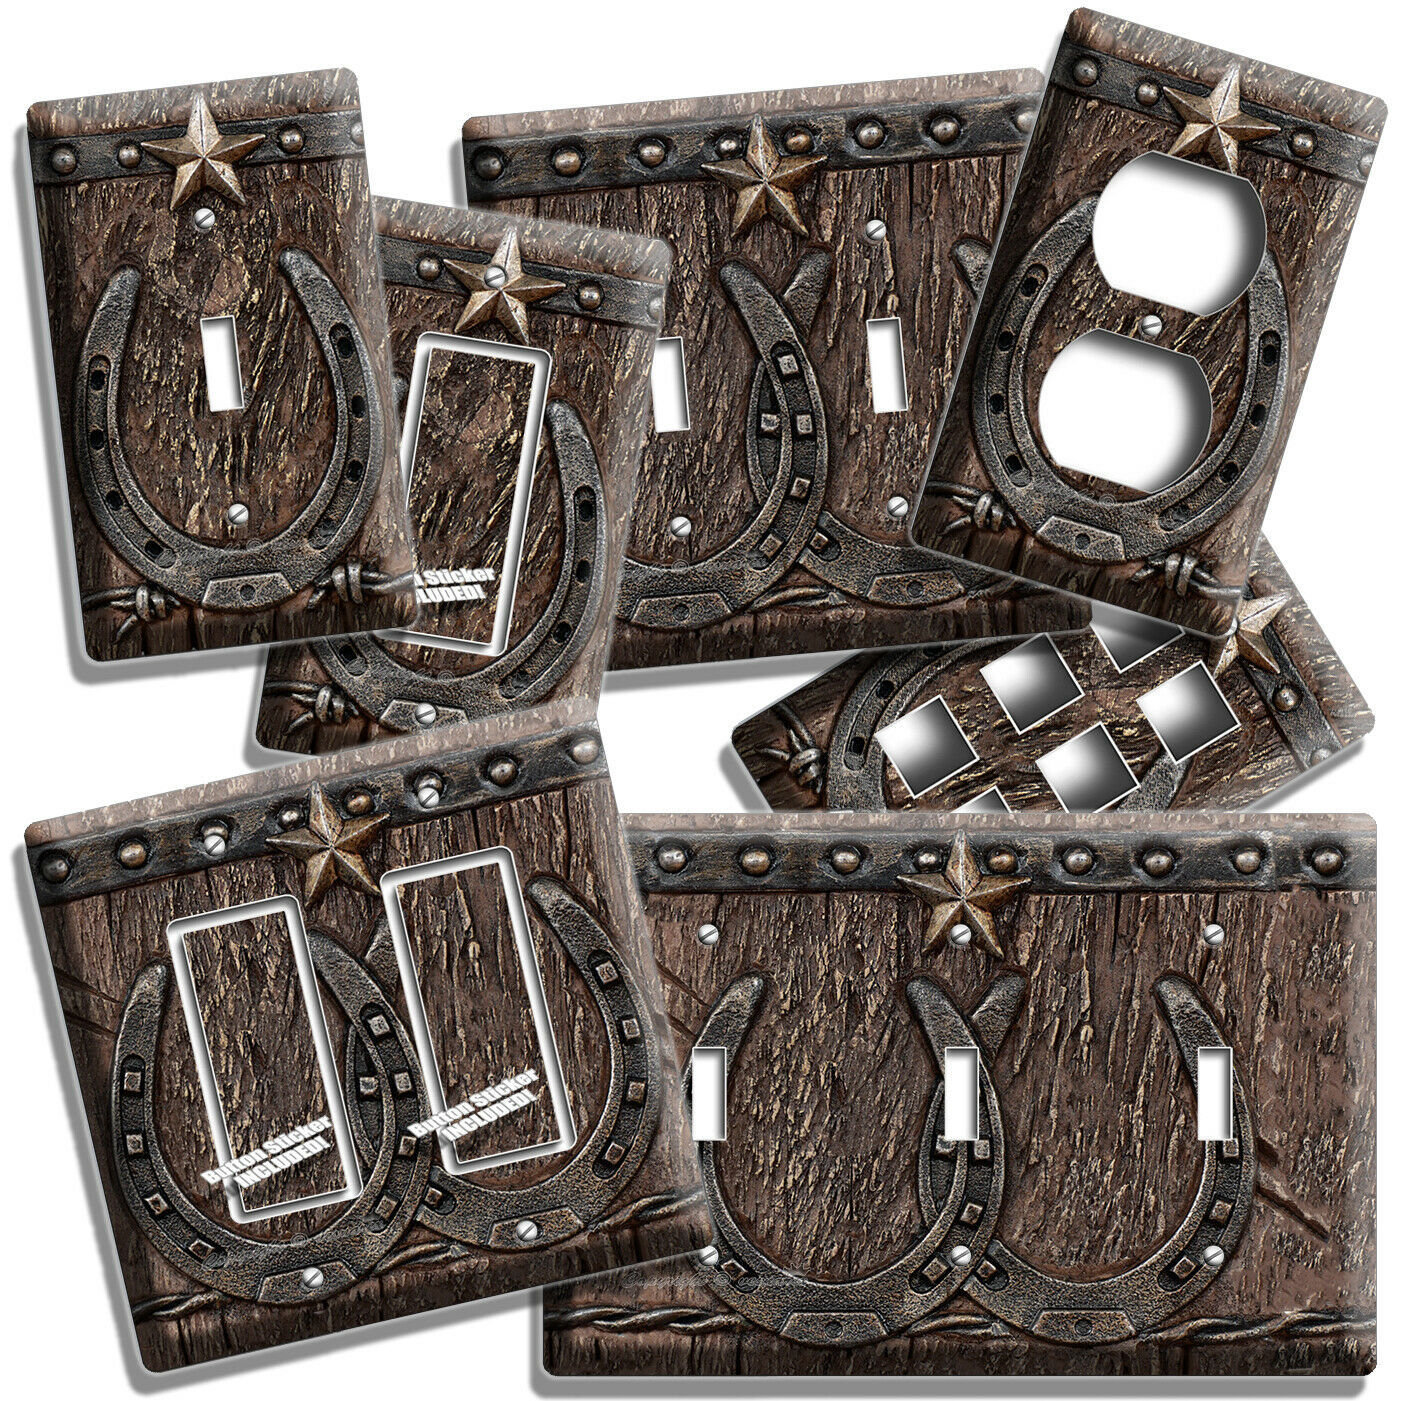 RUSTIC WESTERN COWBOY LONE STAR LUCKY HORSESHOE LIGHT SWITCH OUTLET WALL DECOR - $11.99 - $29.99